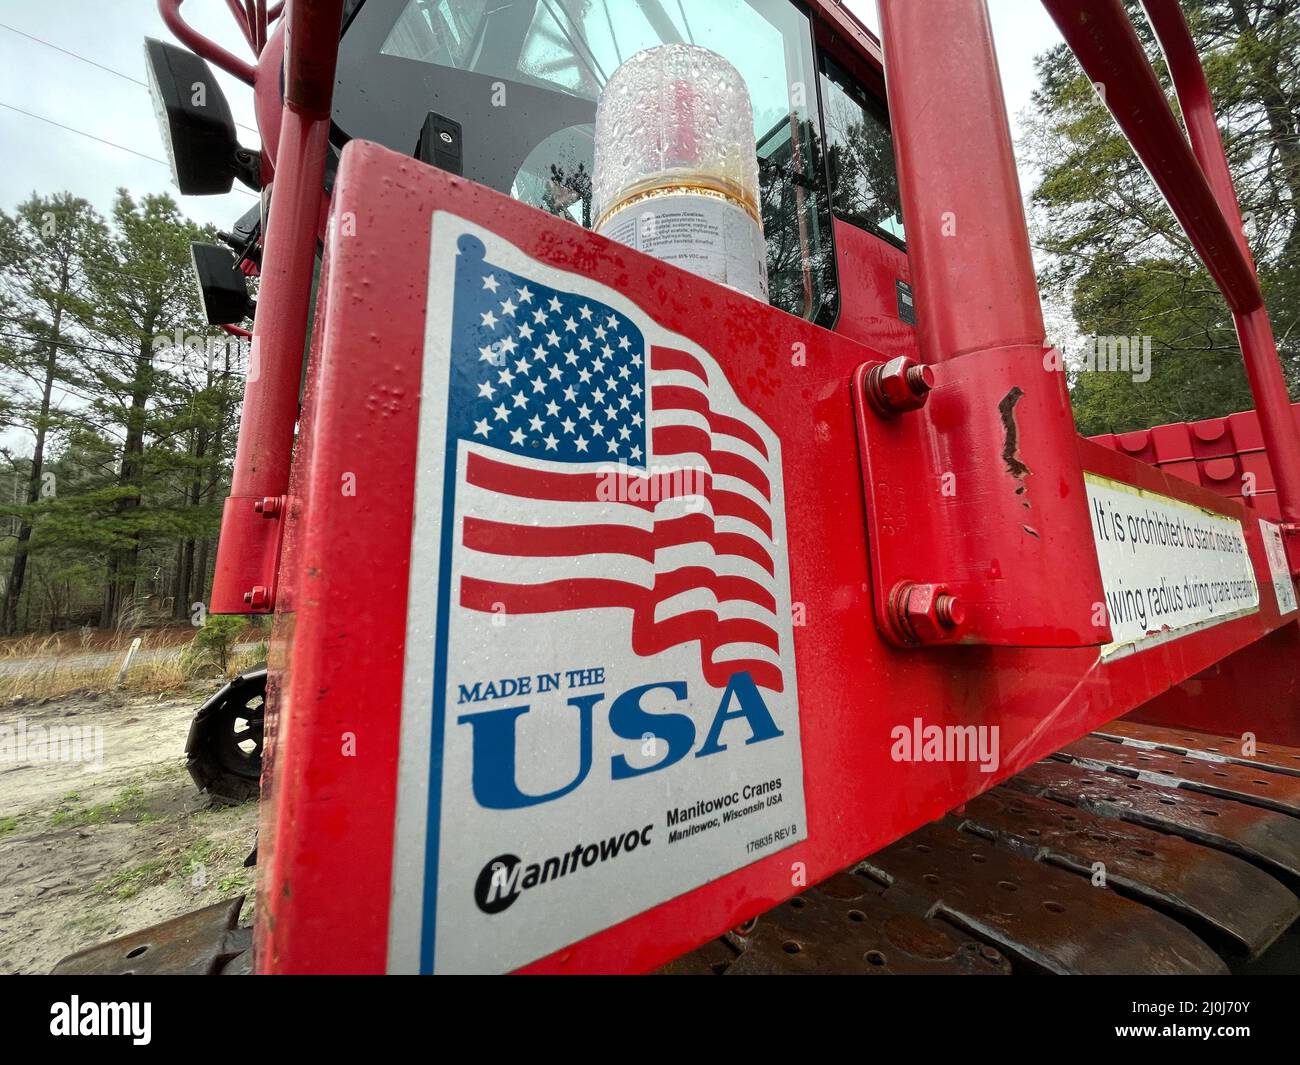 Augusta, Ga USA - 03 19 22: Manitowoc Red Crane Construction scene cloudy rainy day made in USA sign side view Stock Photo